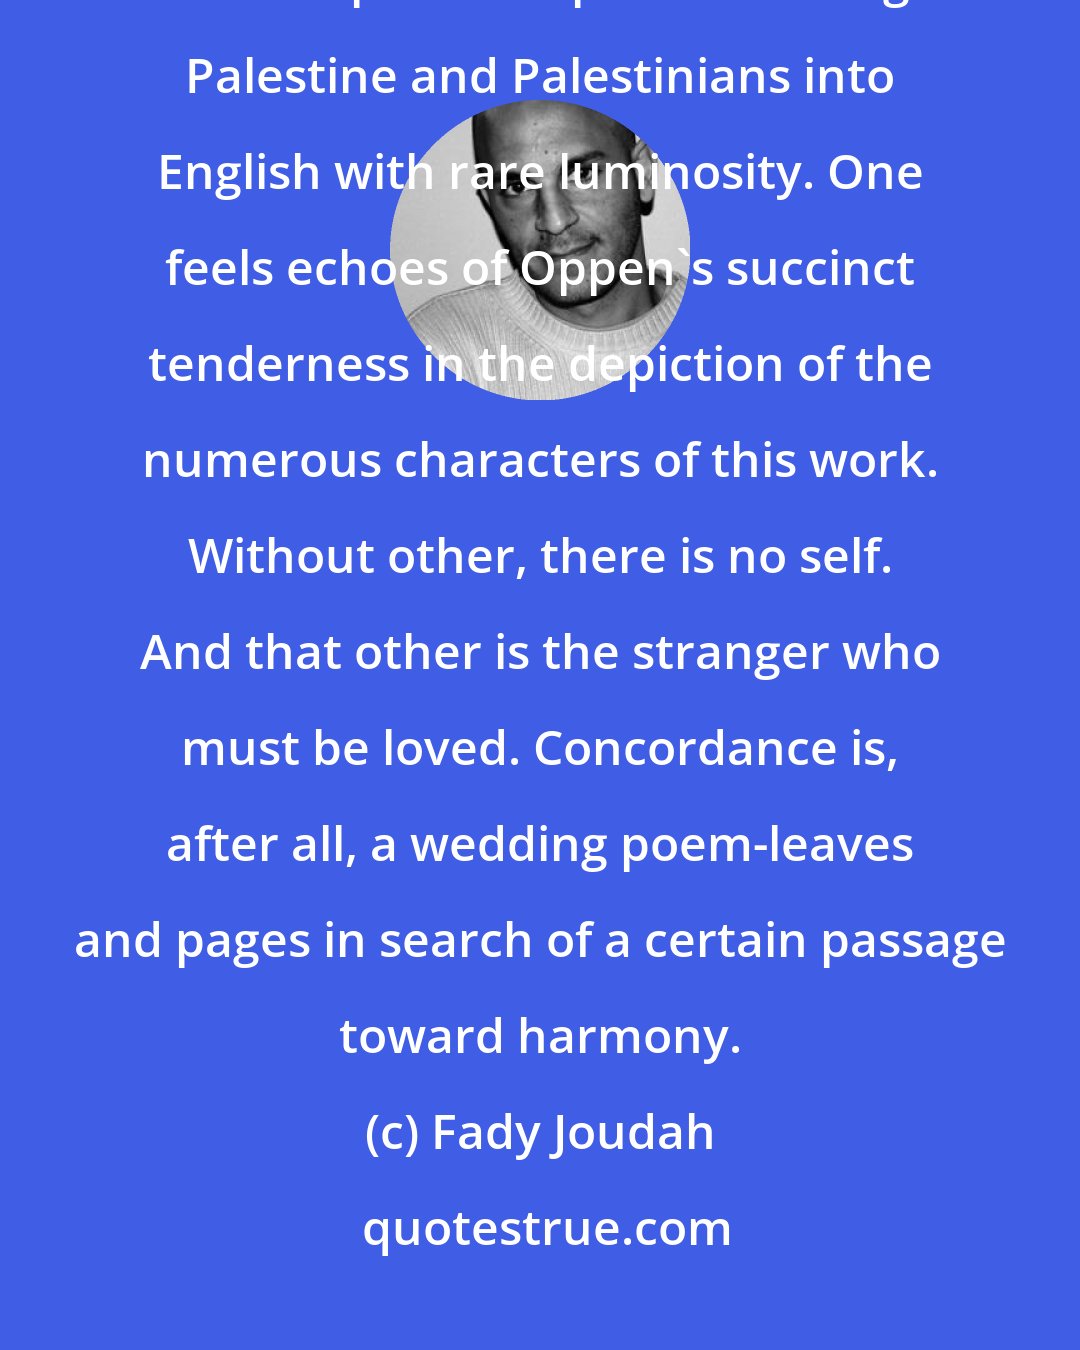 Fady Joudah: A Concordance of Leaves is an epic poem of the indomitable yet fragile human spirit. Philip Metres brings Palestine and Palestinians into English with rare luminosity. One feels echoes of Oppen's succinct tenderness in the depiction of the numerous characters of this work. Without other, there is no self. And that other is the stranger who must be loved. Concordance is, after all, a wedding poem-leaves and pages in search of a certain passage toward harmony.